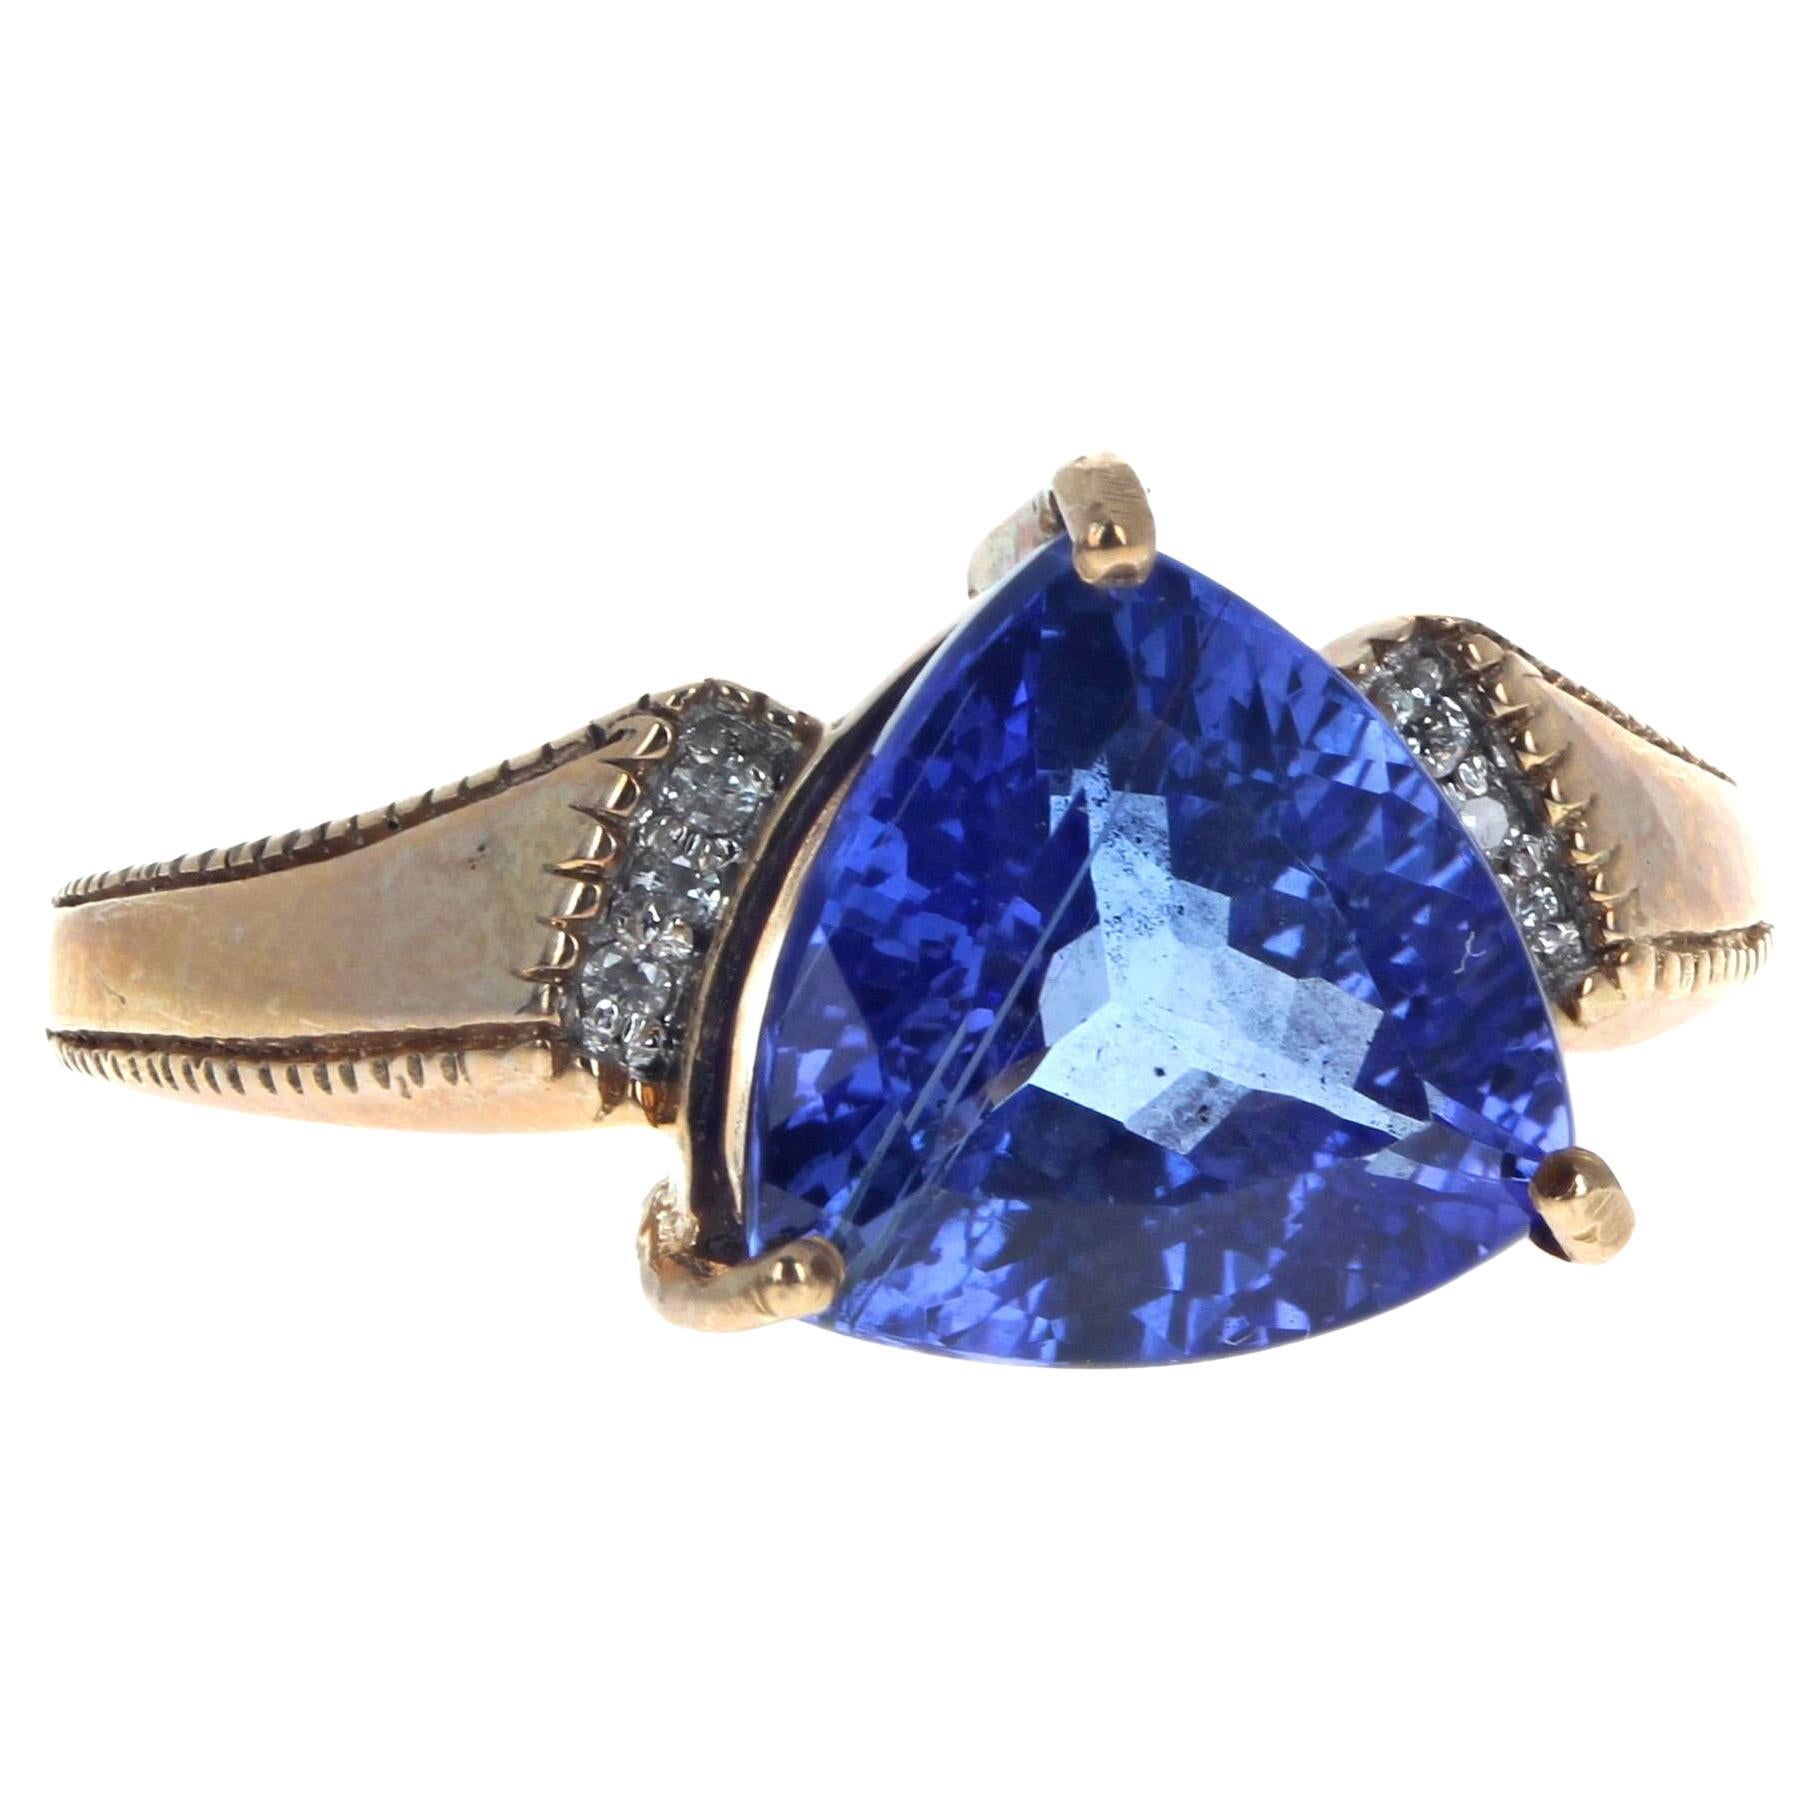 This beautiful ring is 14Kt Yellow Gold size 7.  The center blue Tanzanite gemstone is 2.6 carats and is enhanced on each side by 3 tiny little white Diamonds on each side.  This stands out beautifully on your hand.  